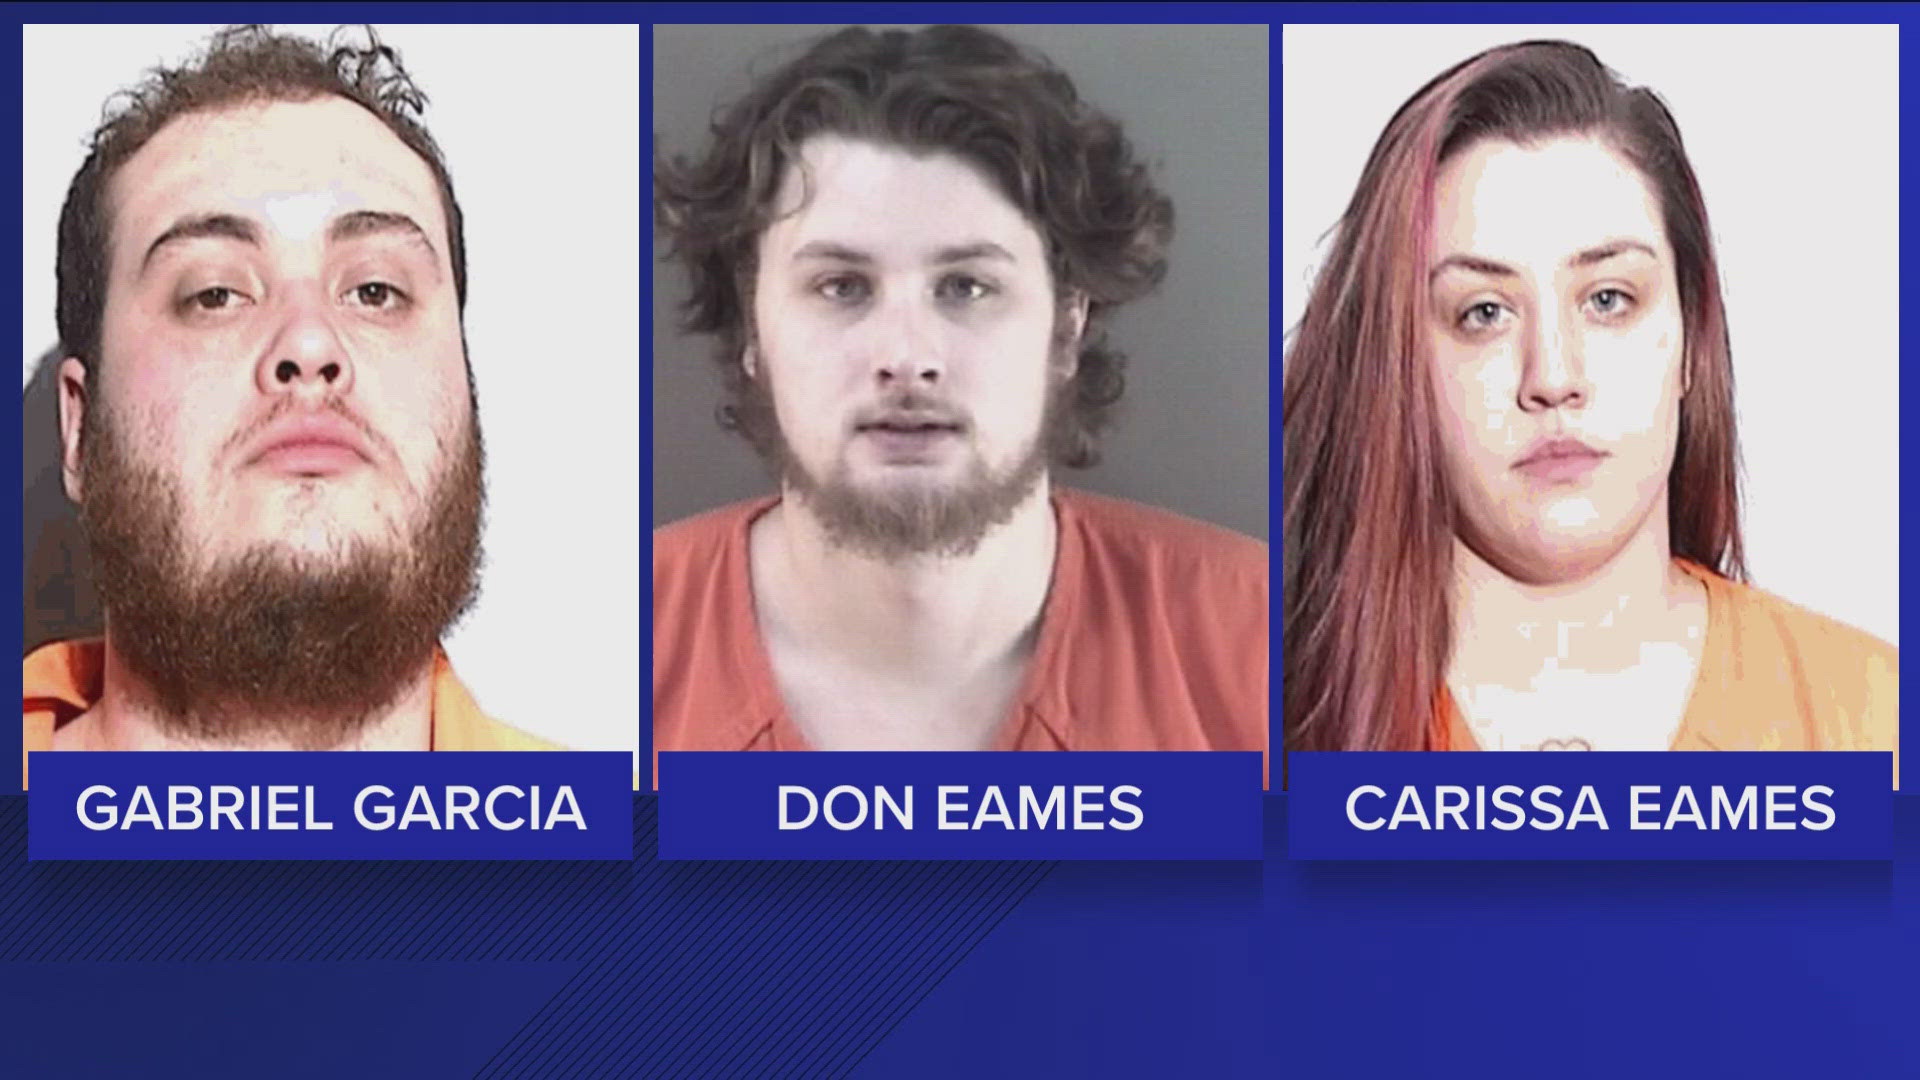 Gabriel Garcia, Don Eames and Carissa Eames' convictions come one week after two others convicted in the case were sentenced to life in prison for aggravated murder.